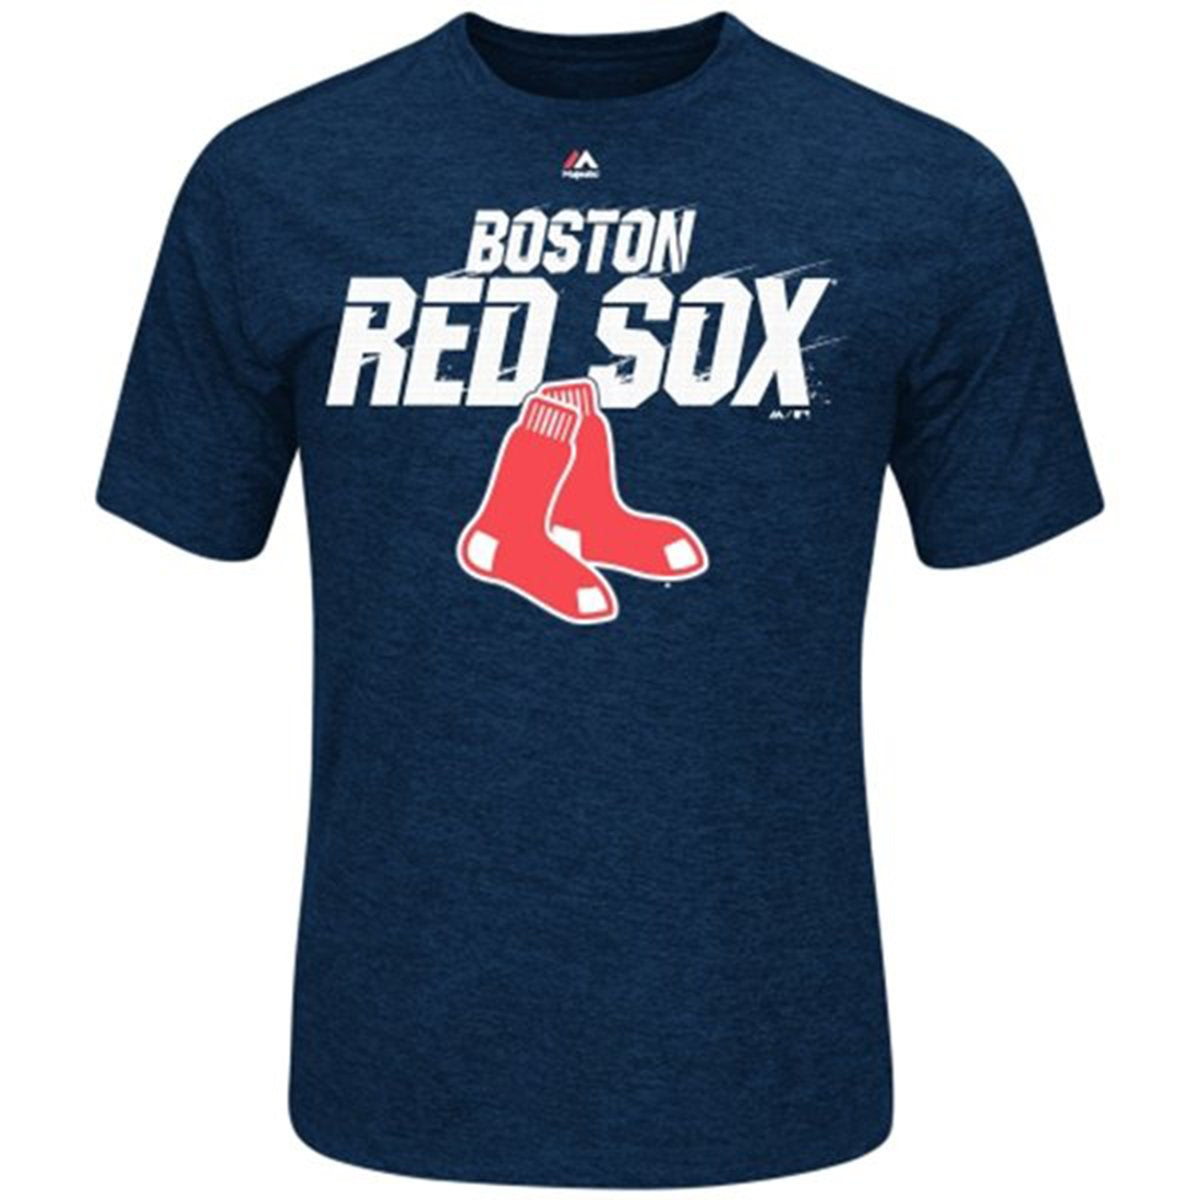 Boston Red Sox Adult Synthetic Winning Moment T-Shirt